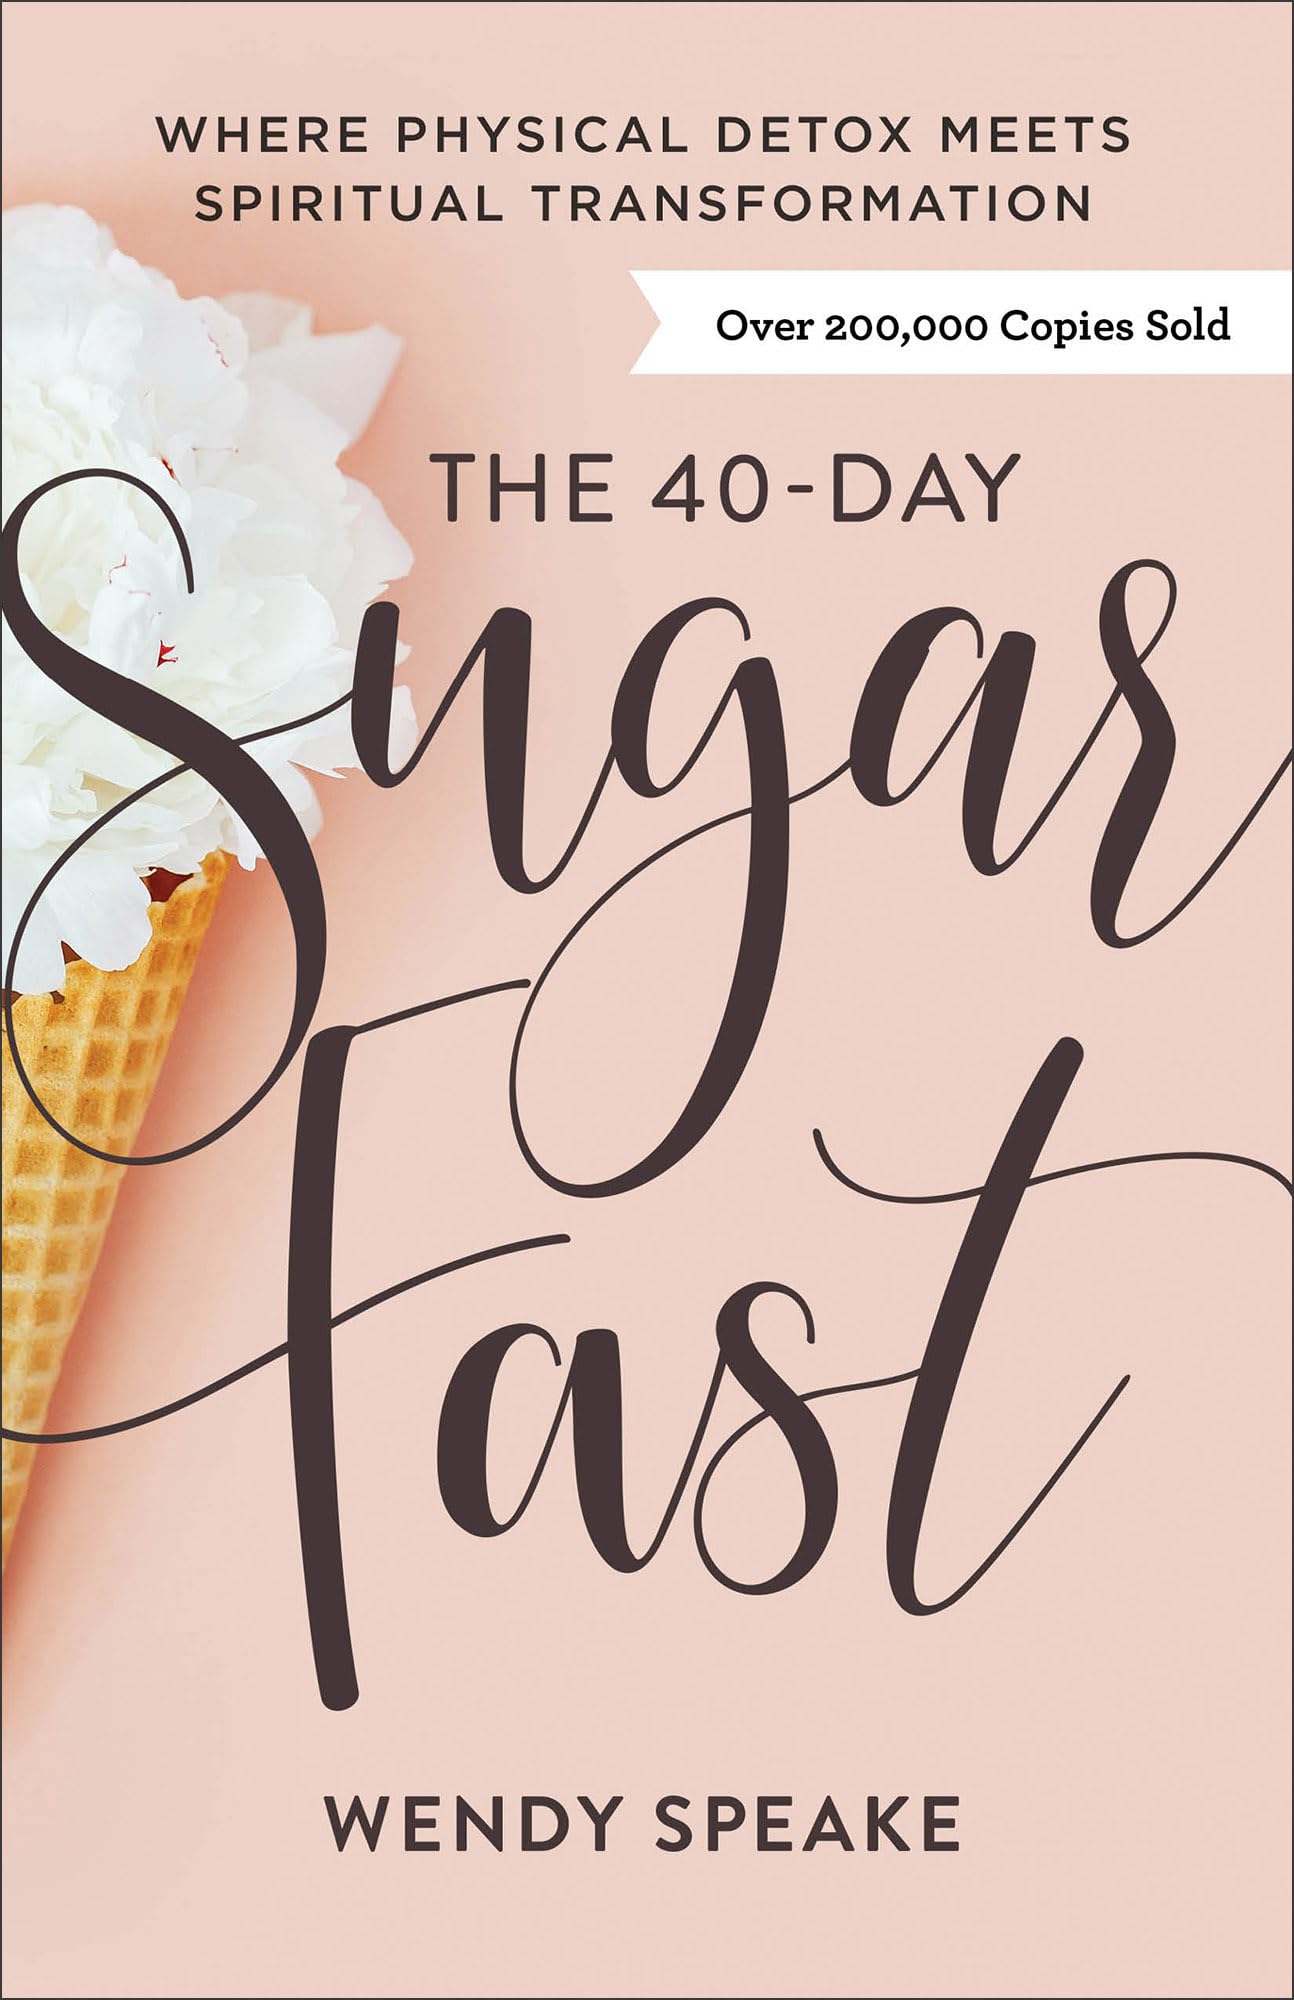 The 40-Day Sugar Fast: Where Physical Detox Meets Spiritual Transformation by Speake, Wendy